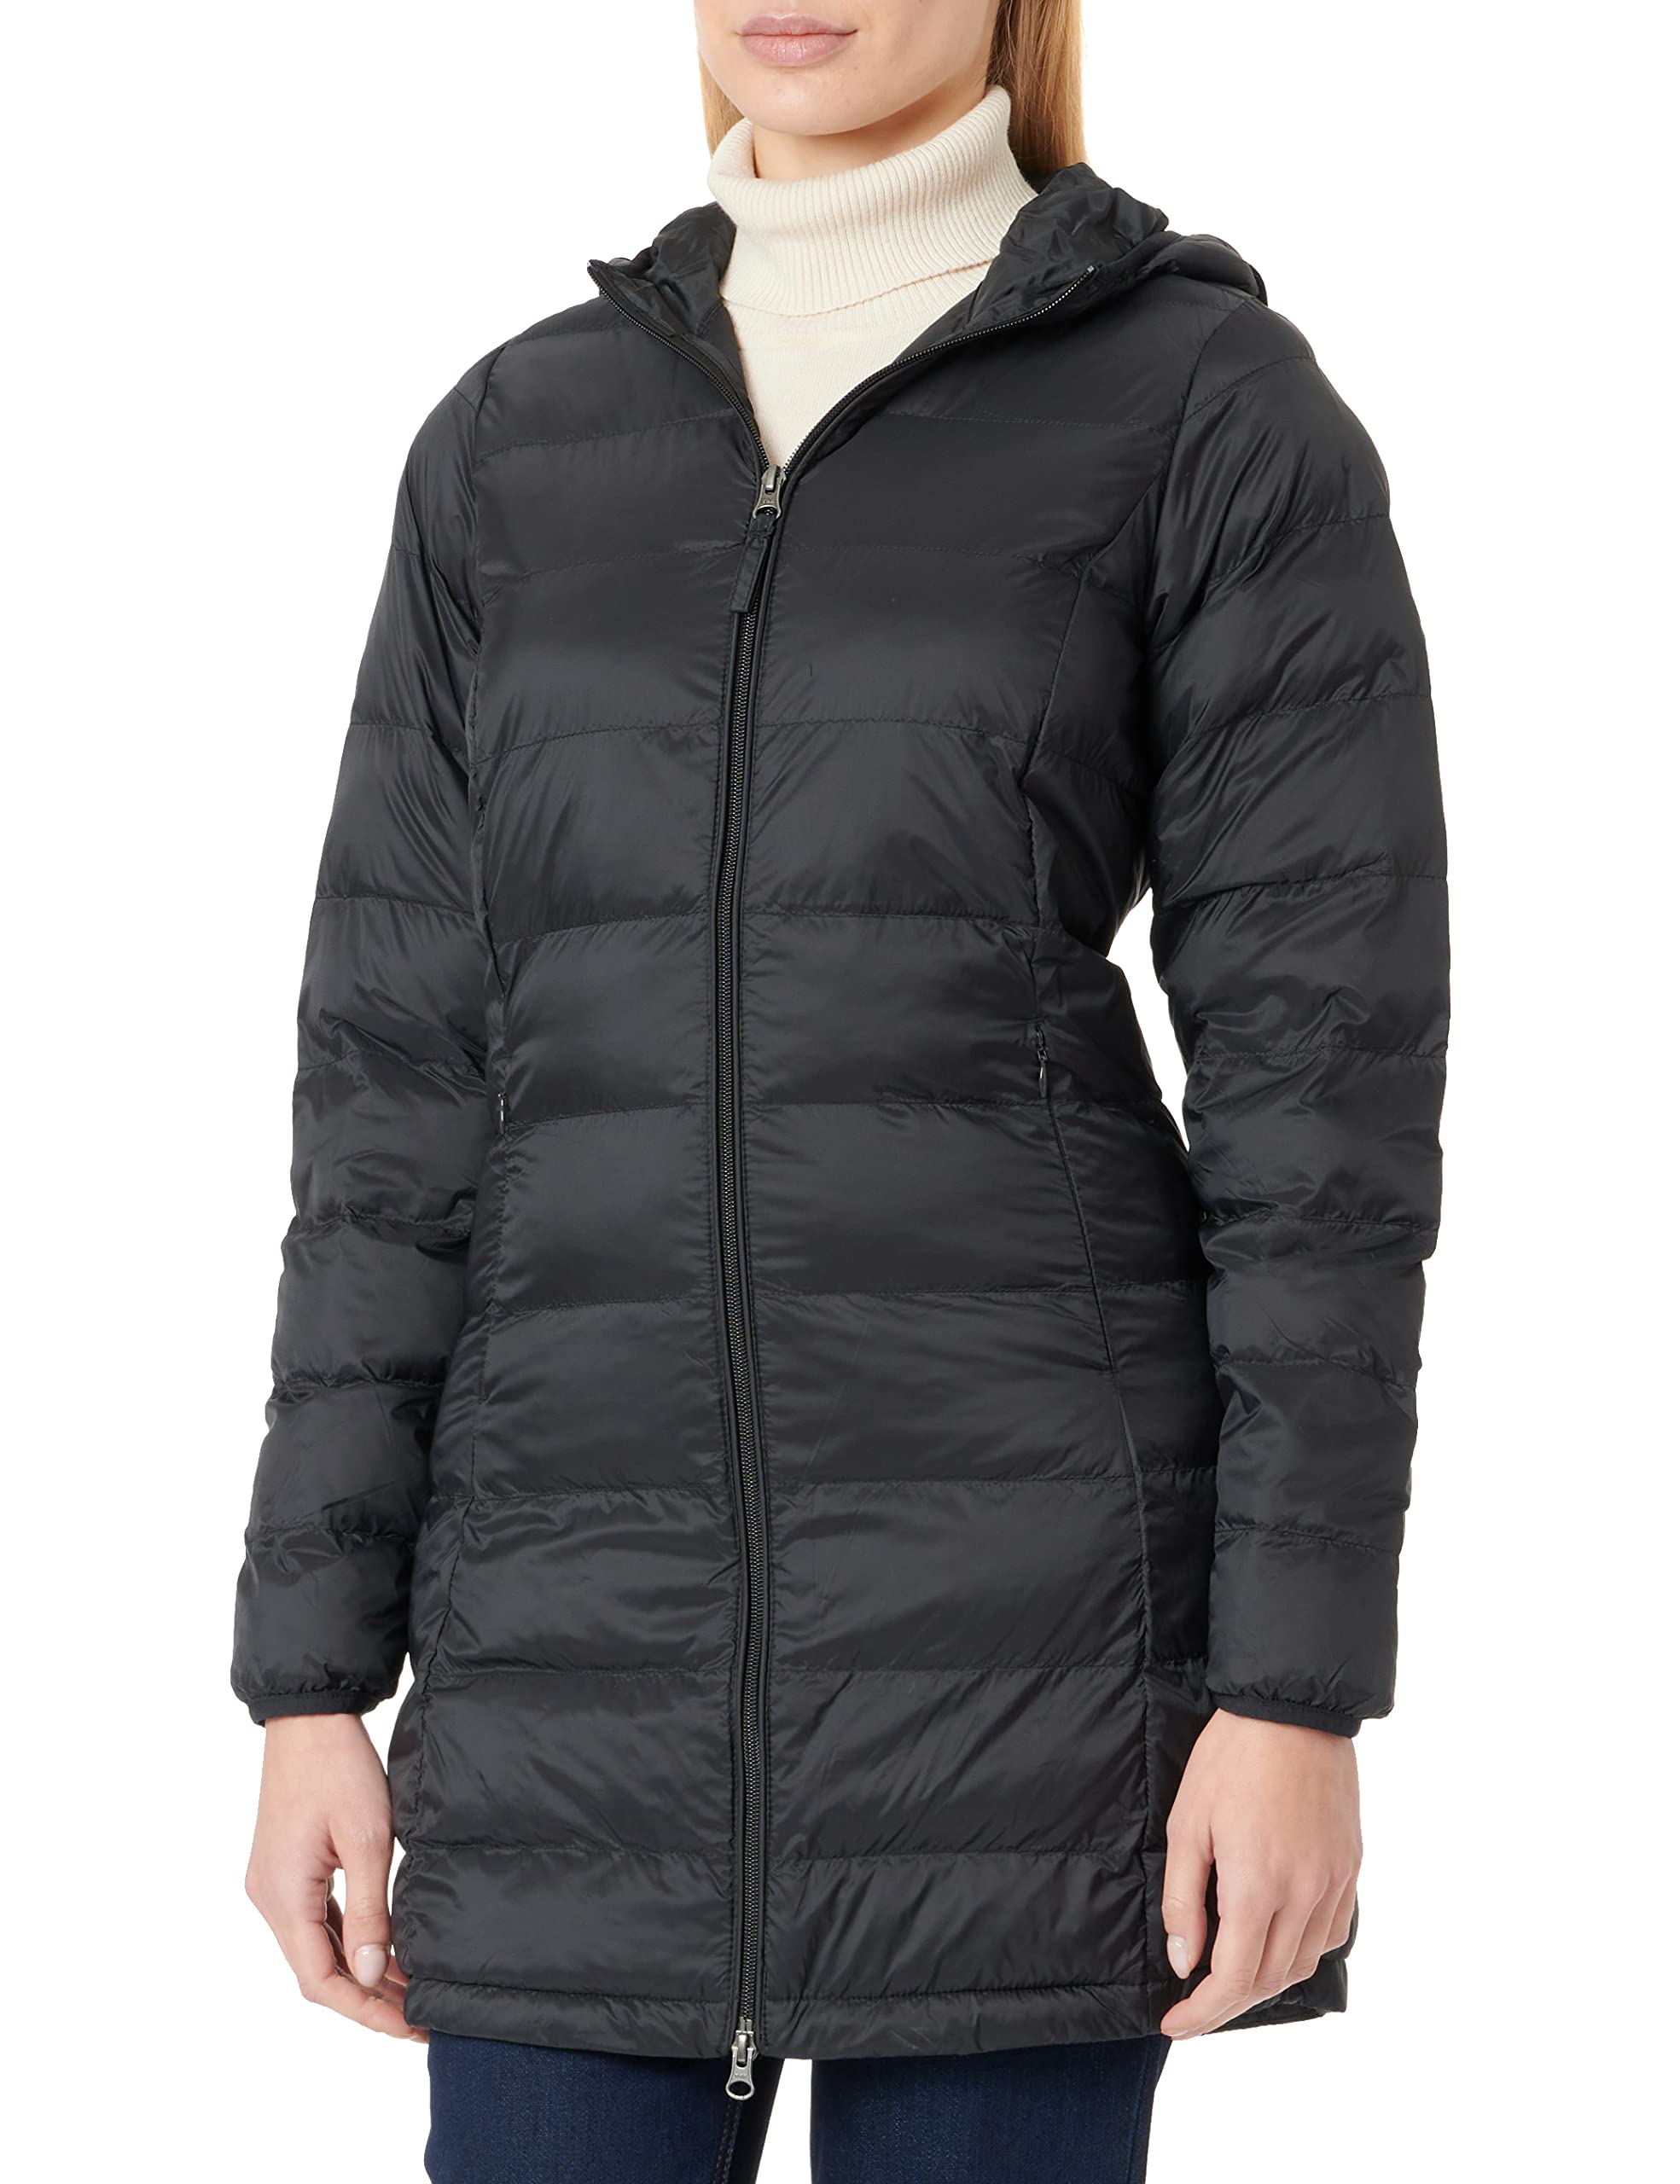 Amazon Essentials Women's Lightweight Water-Resistant Hooded Puffer Coat (Available in Plus Size)